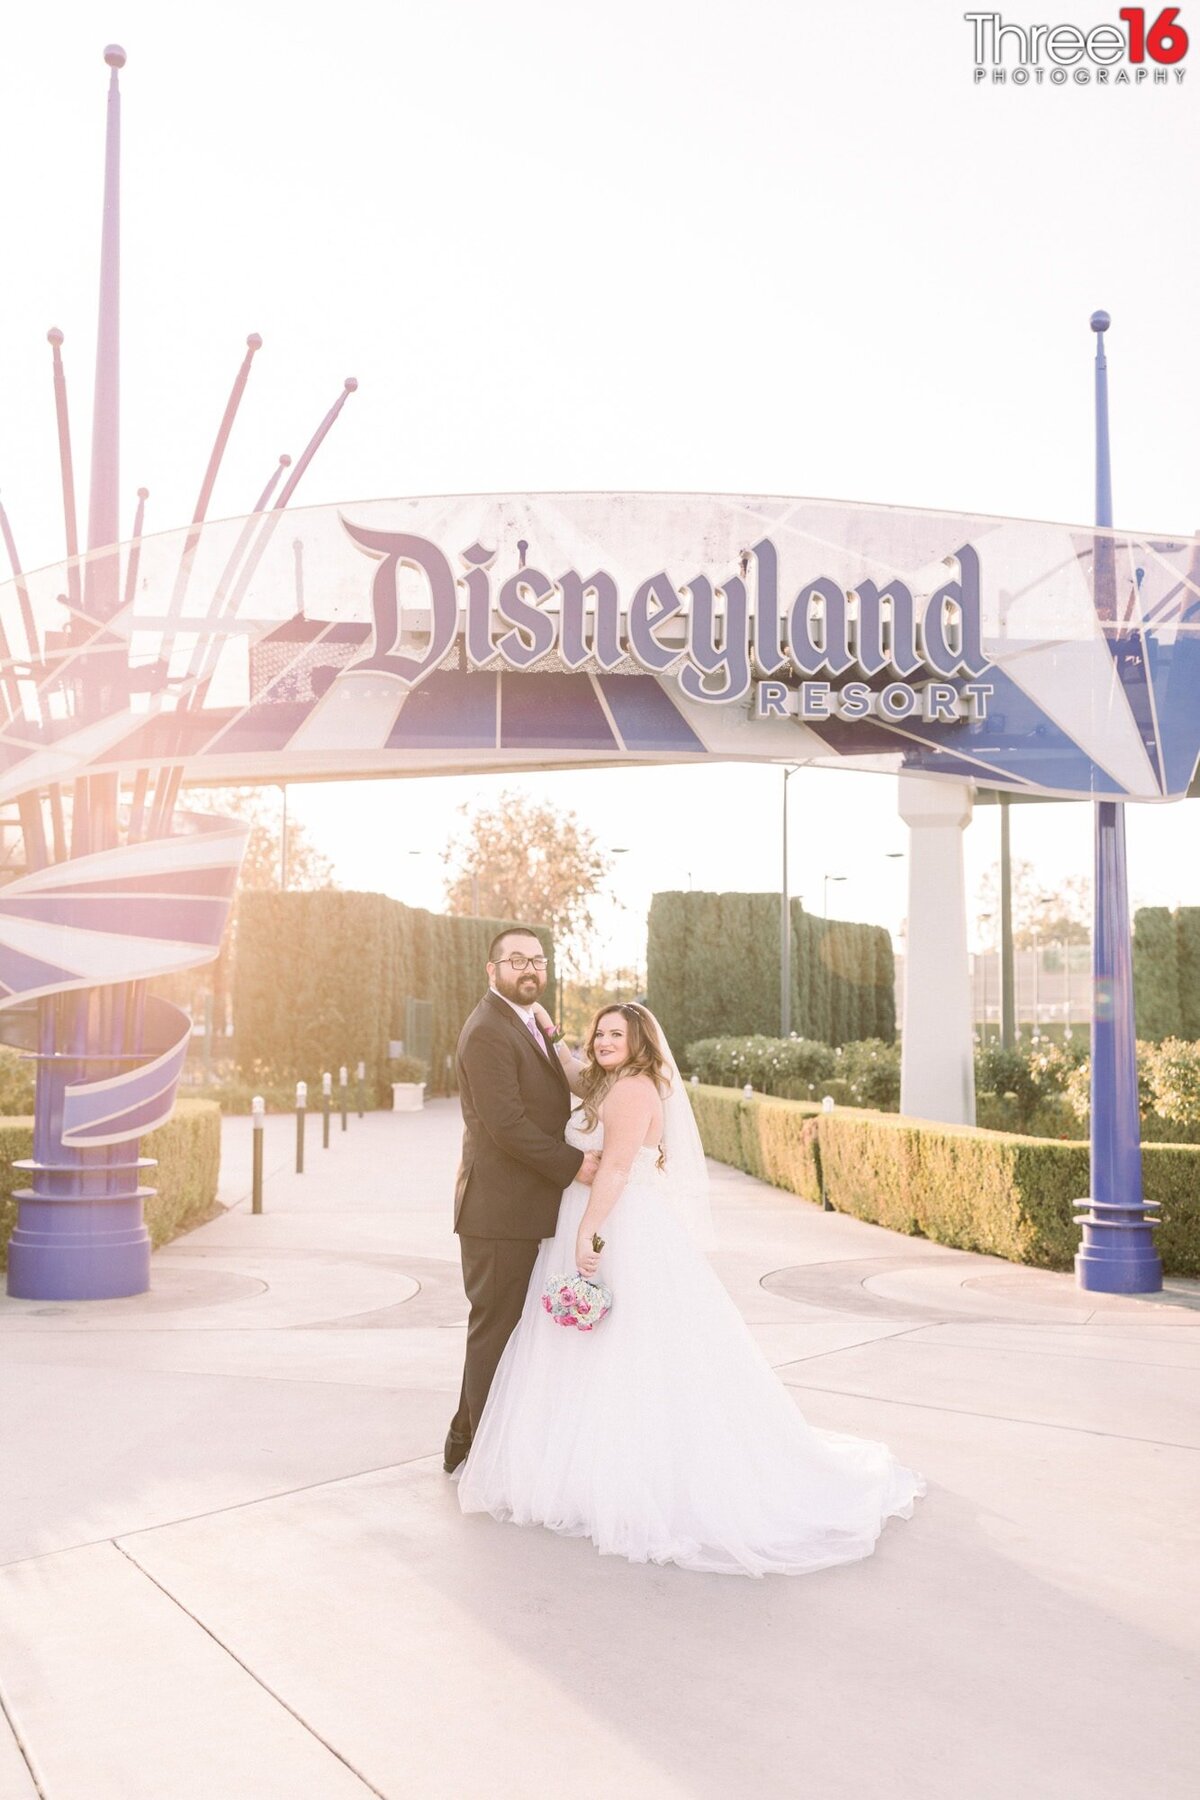 Newly married couple pose together in front of the entrance to Disneyland